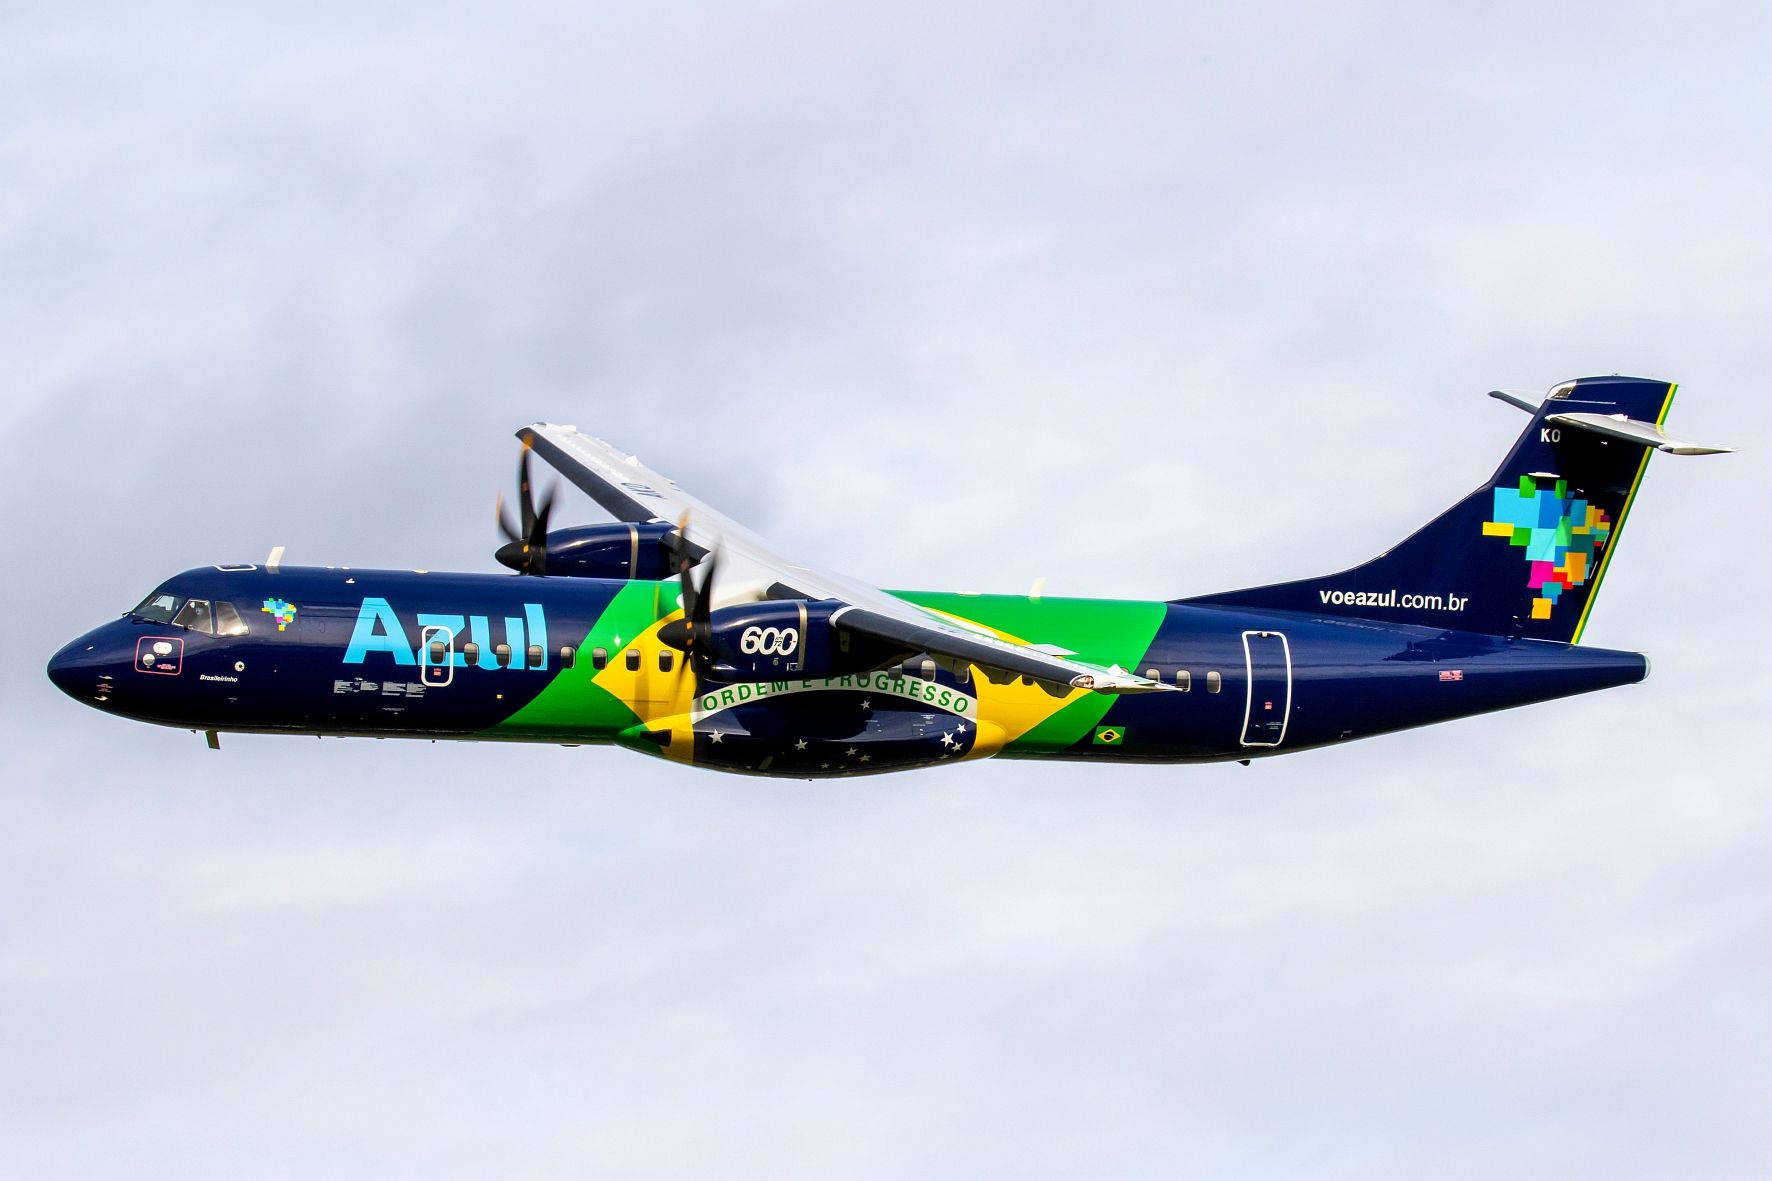 An Azul ATR turboprop in a special livery.